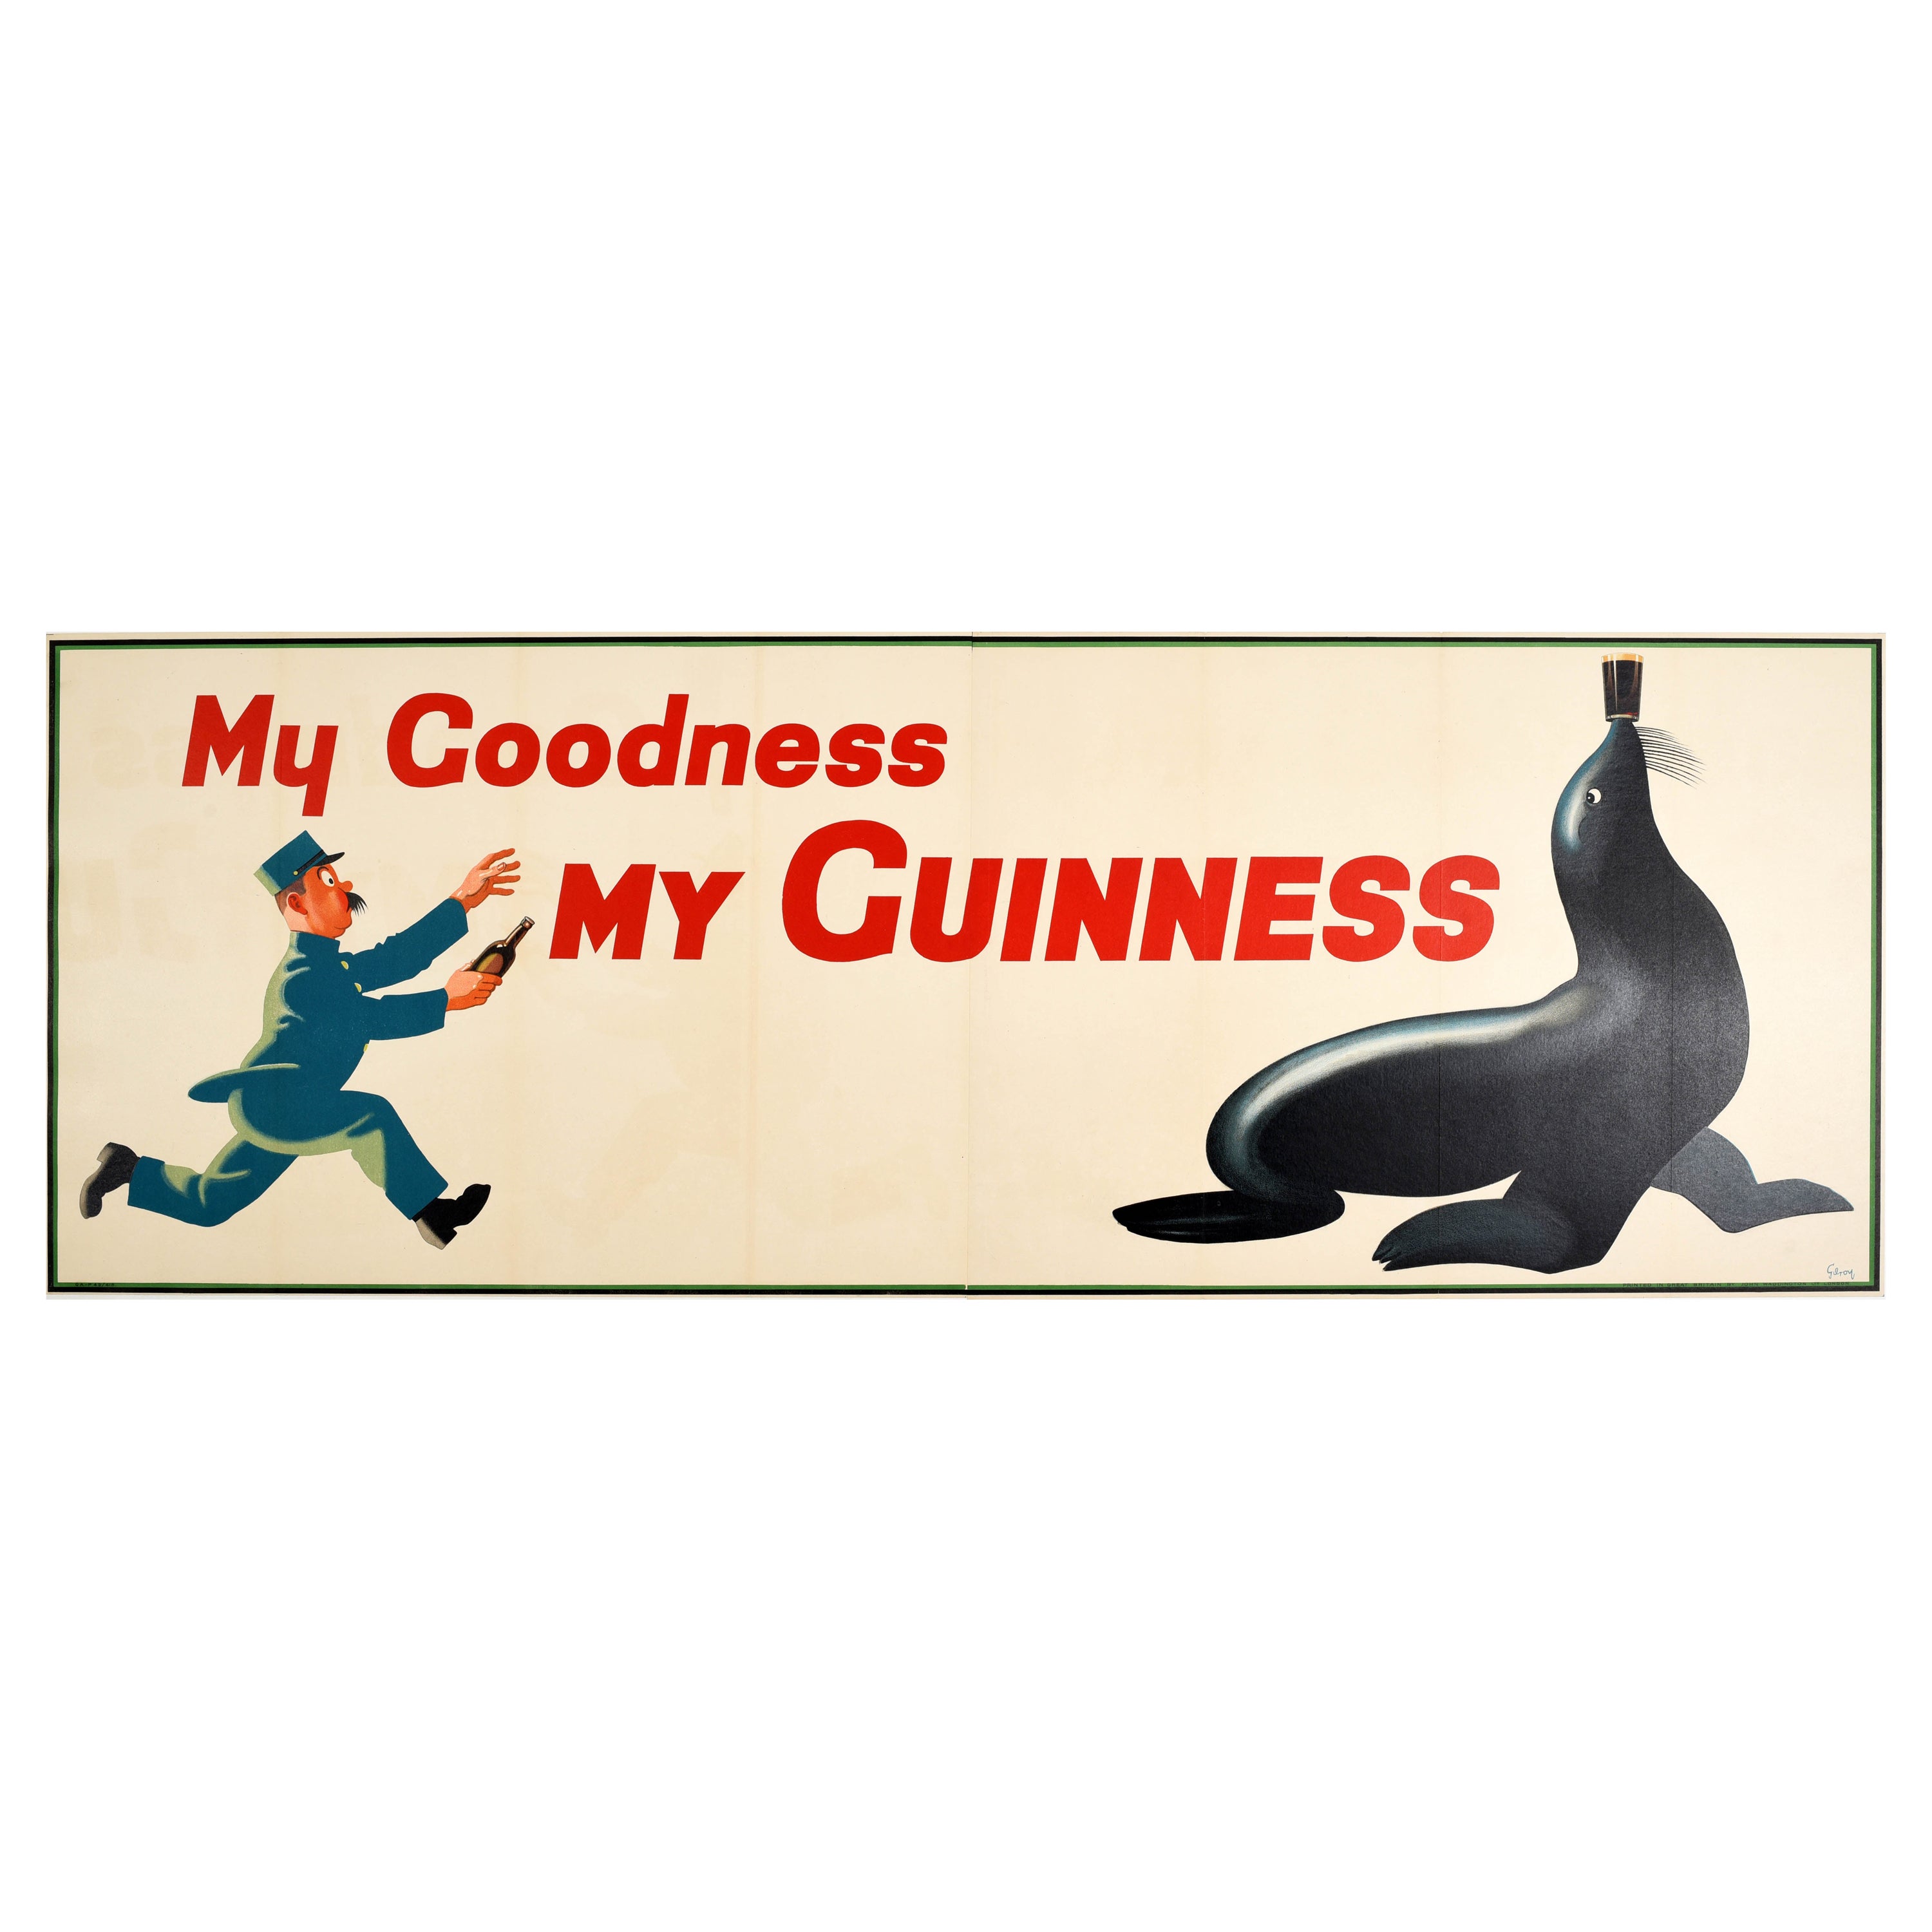 Original Vintage Drink Poster My Goodness My Guinness Zoo Keeper Sea Lion Design